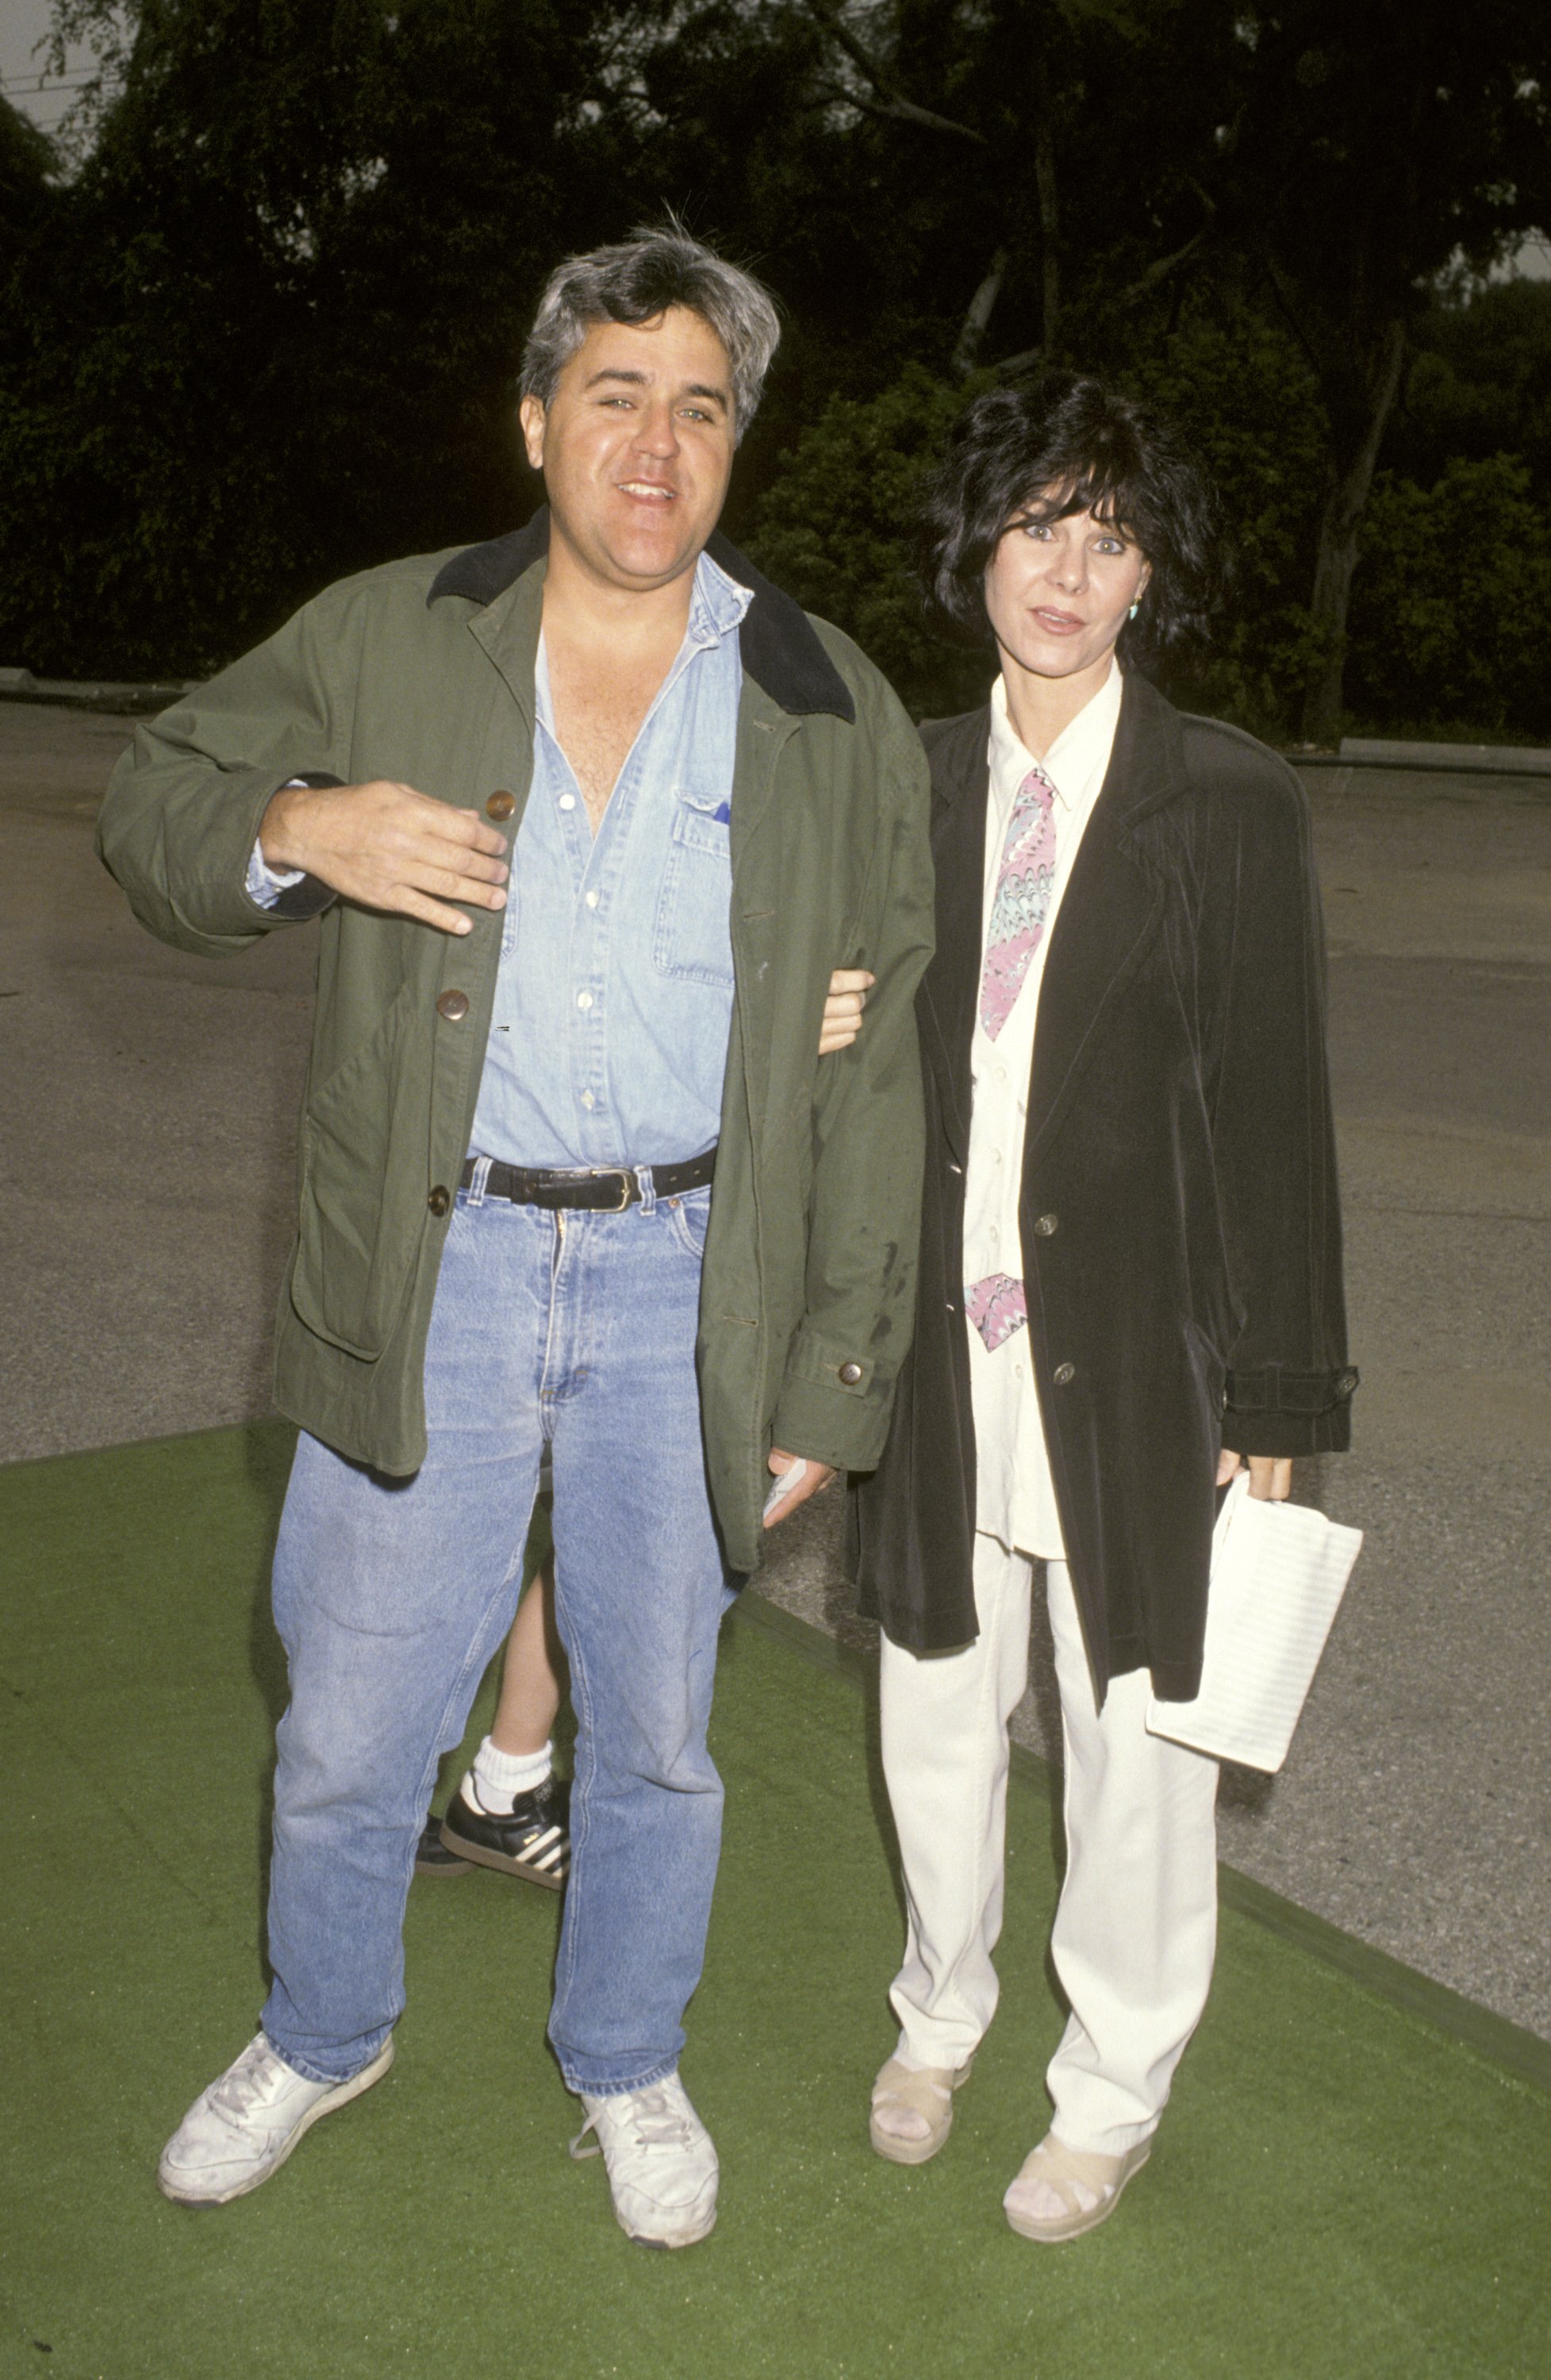 Jay Leno and his wife Mavis Leno attend the Permanent Charities "Earth Walk '93" at Universal Studios in 1993, in Universal City, California. | Source: Getty Images